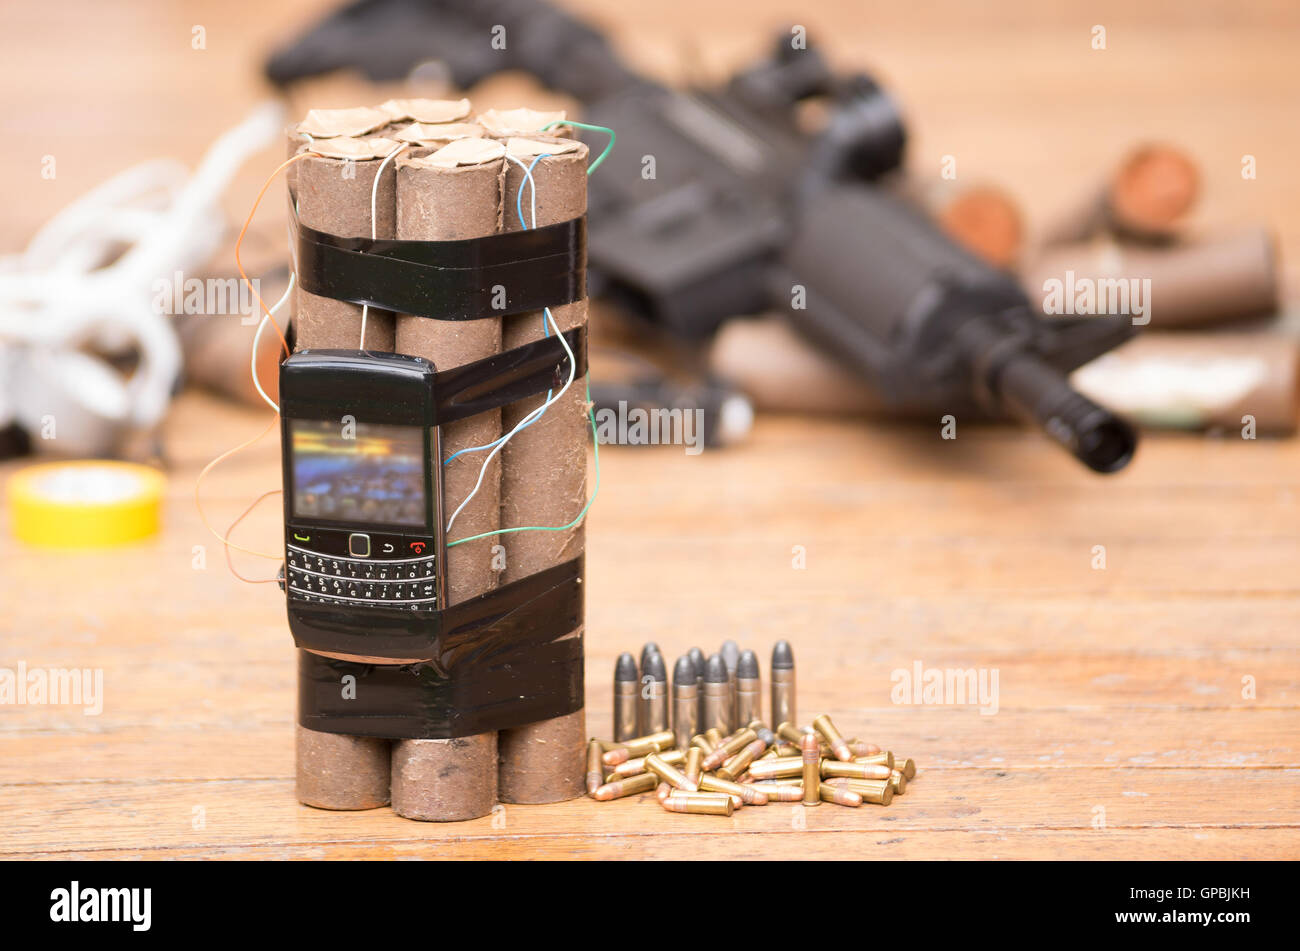 Homemade bomb with explosives and cellular phone attached wires sitting next to ammunition, machine gun in background. Stock Photo